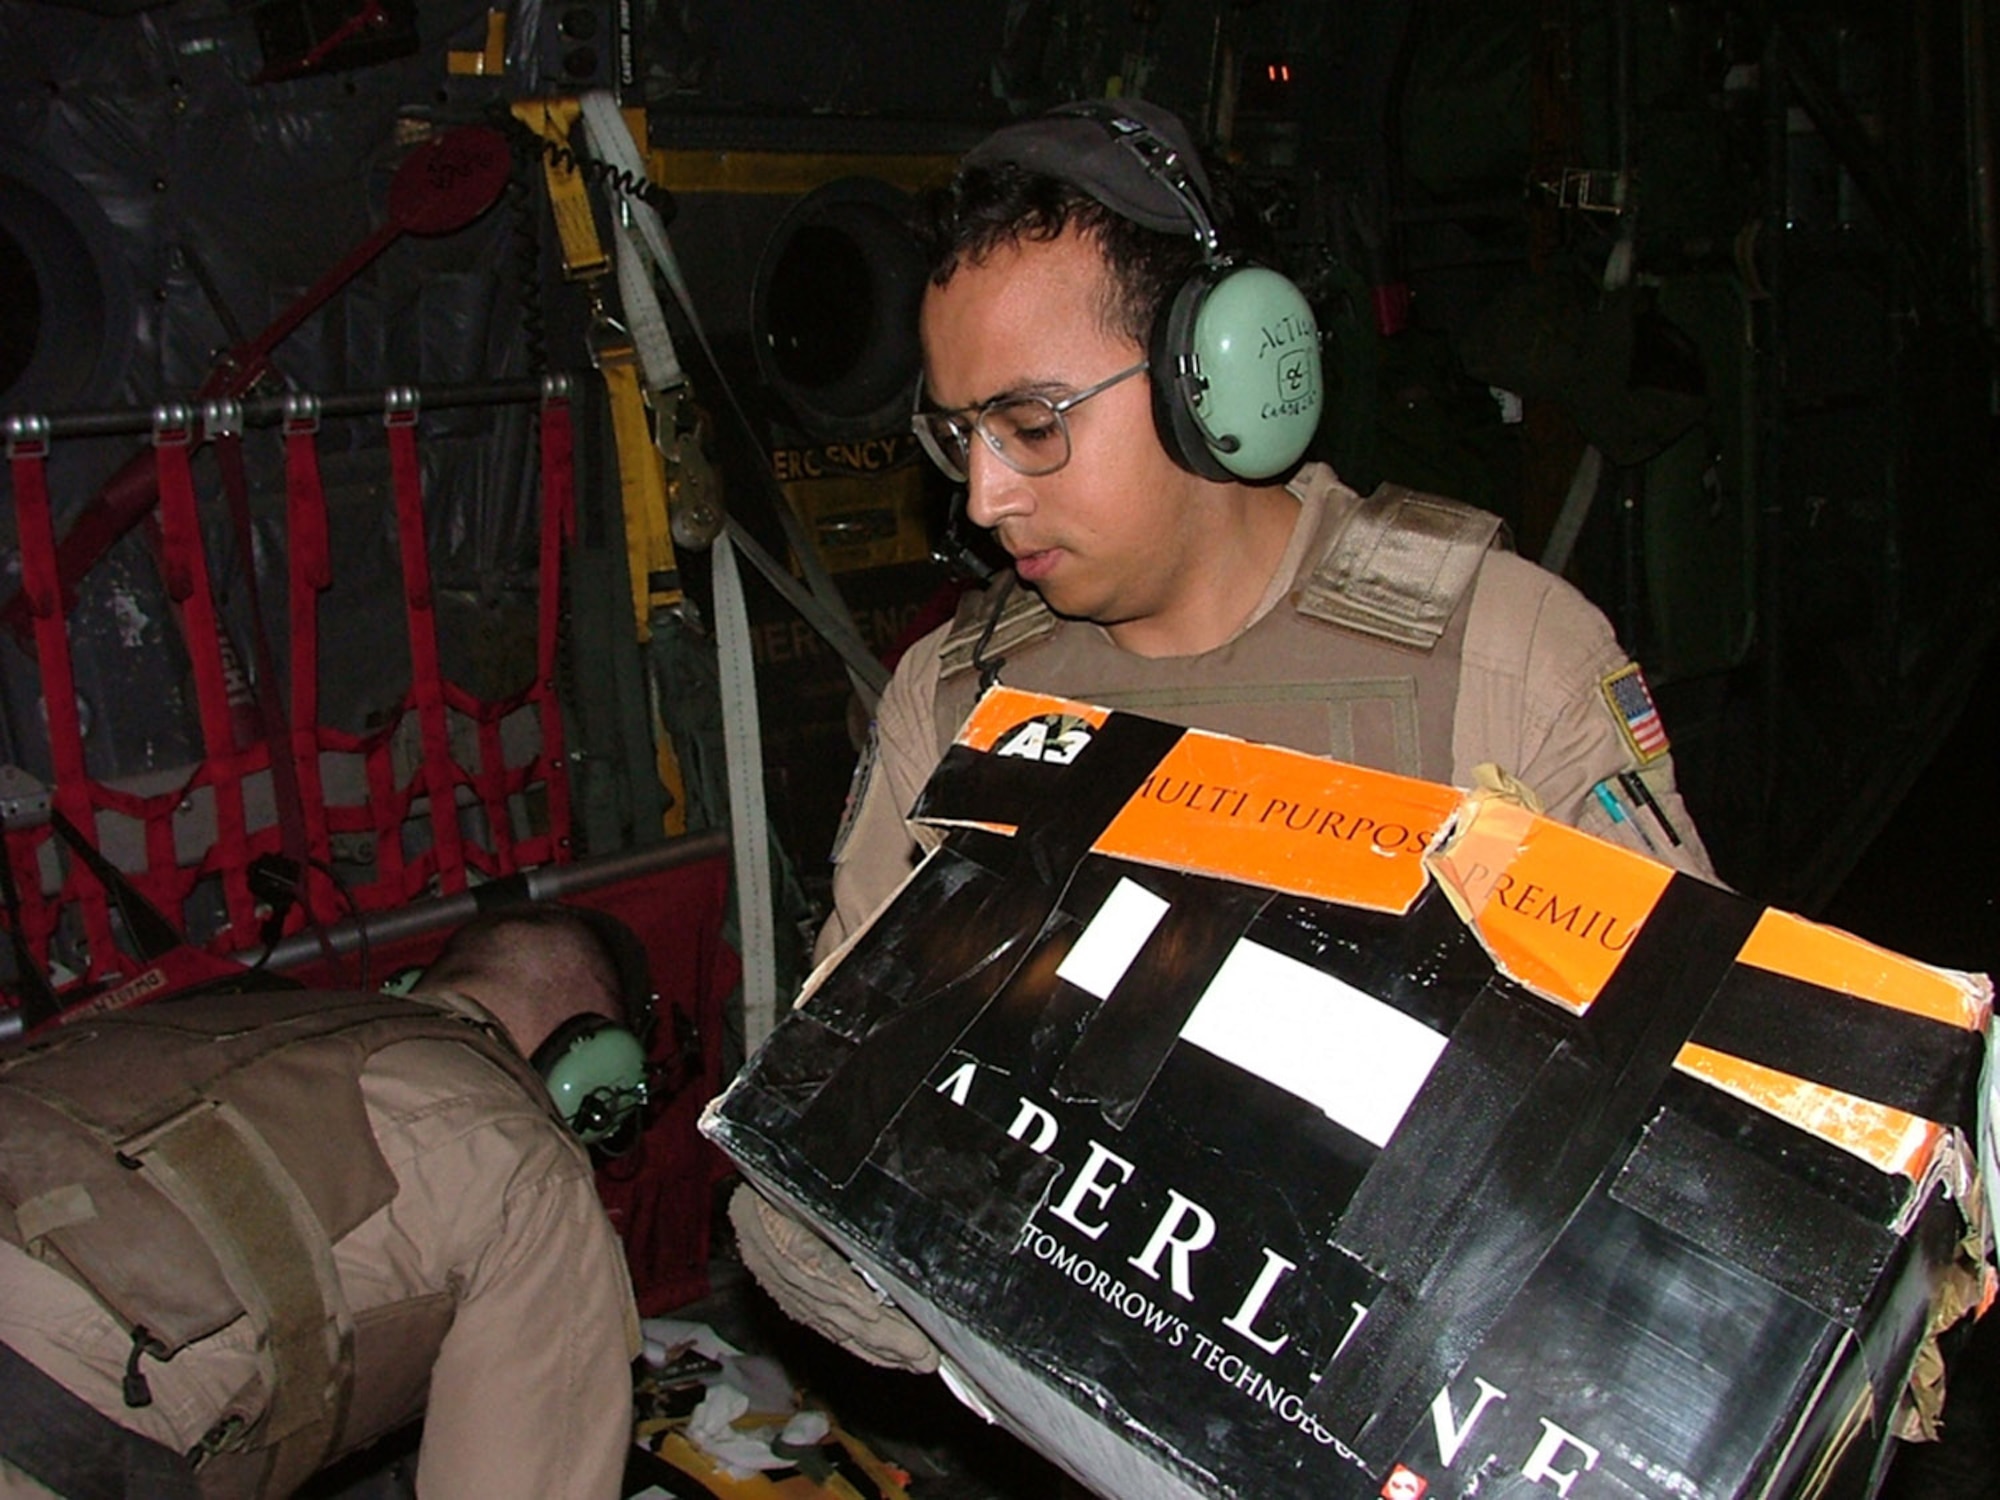 Airman 1st Class David Cardenas positions a box of leaflets to be dropped over Afghanistan May 21 in Southwest Asia. Airman Cardenas dropped more than 80,000 leaflets over Afghanistan in support of Operation Enduring Freedom. Airman Cardenas is assigned to the 746th Expeditionary Airlift Squadron. One side of the 6-by-4 inch leaflets urged the Taliban to give up by stating, "The ANSF (Afghan National Security Forces) and ISAF (International Security Assistance Force) are ridding Helmand of the foreign Taliban." Helmand is a province in Afghanistan where Taliban insurgents are said to be located. On the other side, it reads, "The Taliban are commanded by foreigners who seek to destroy Afghanistan. There is no honor in fighting alongside the enemies of Afghanistan." (U.S. Air Force photo)